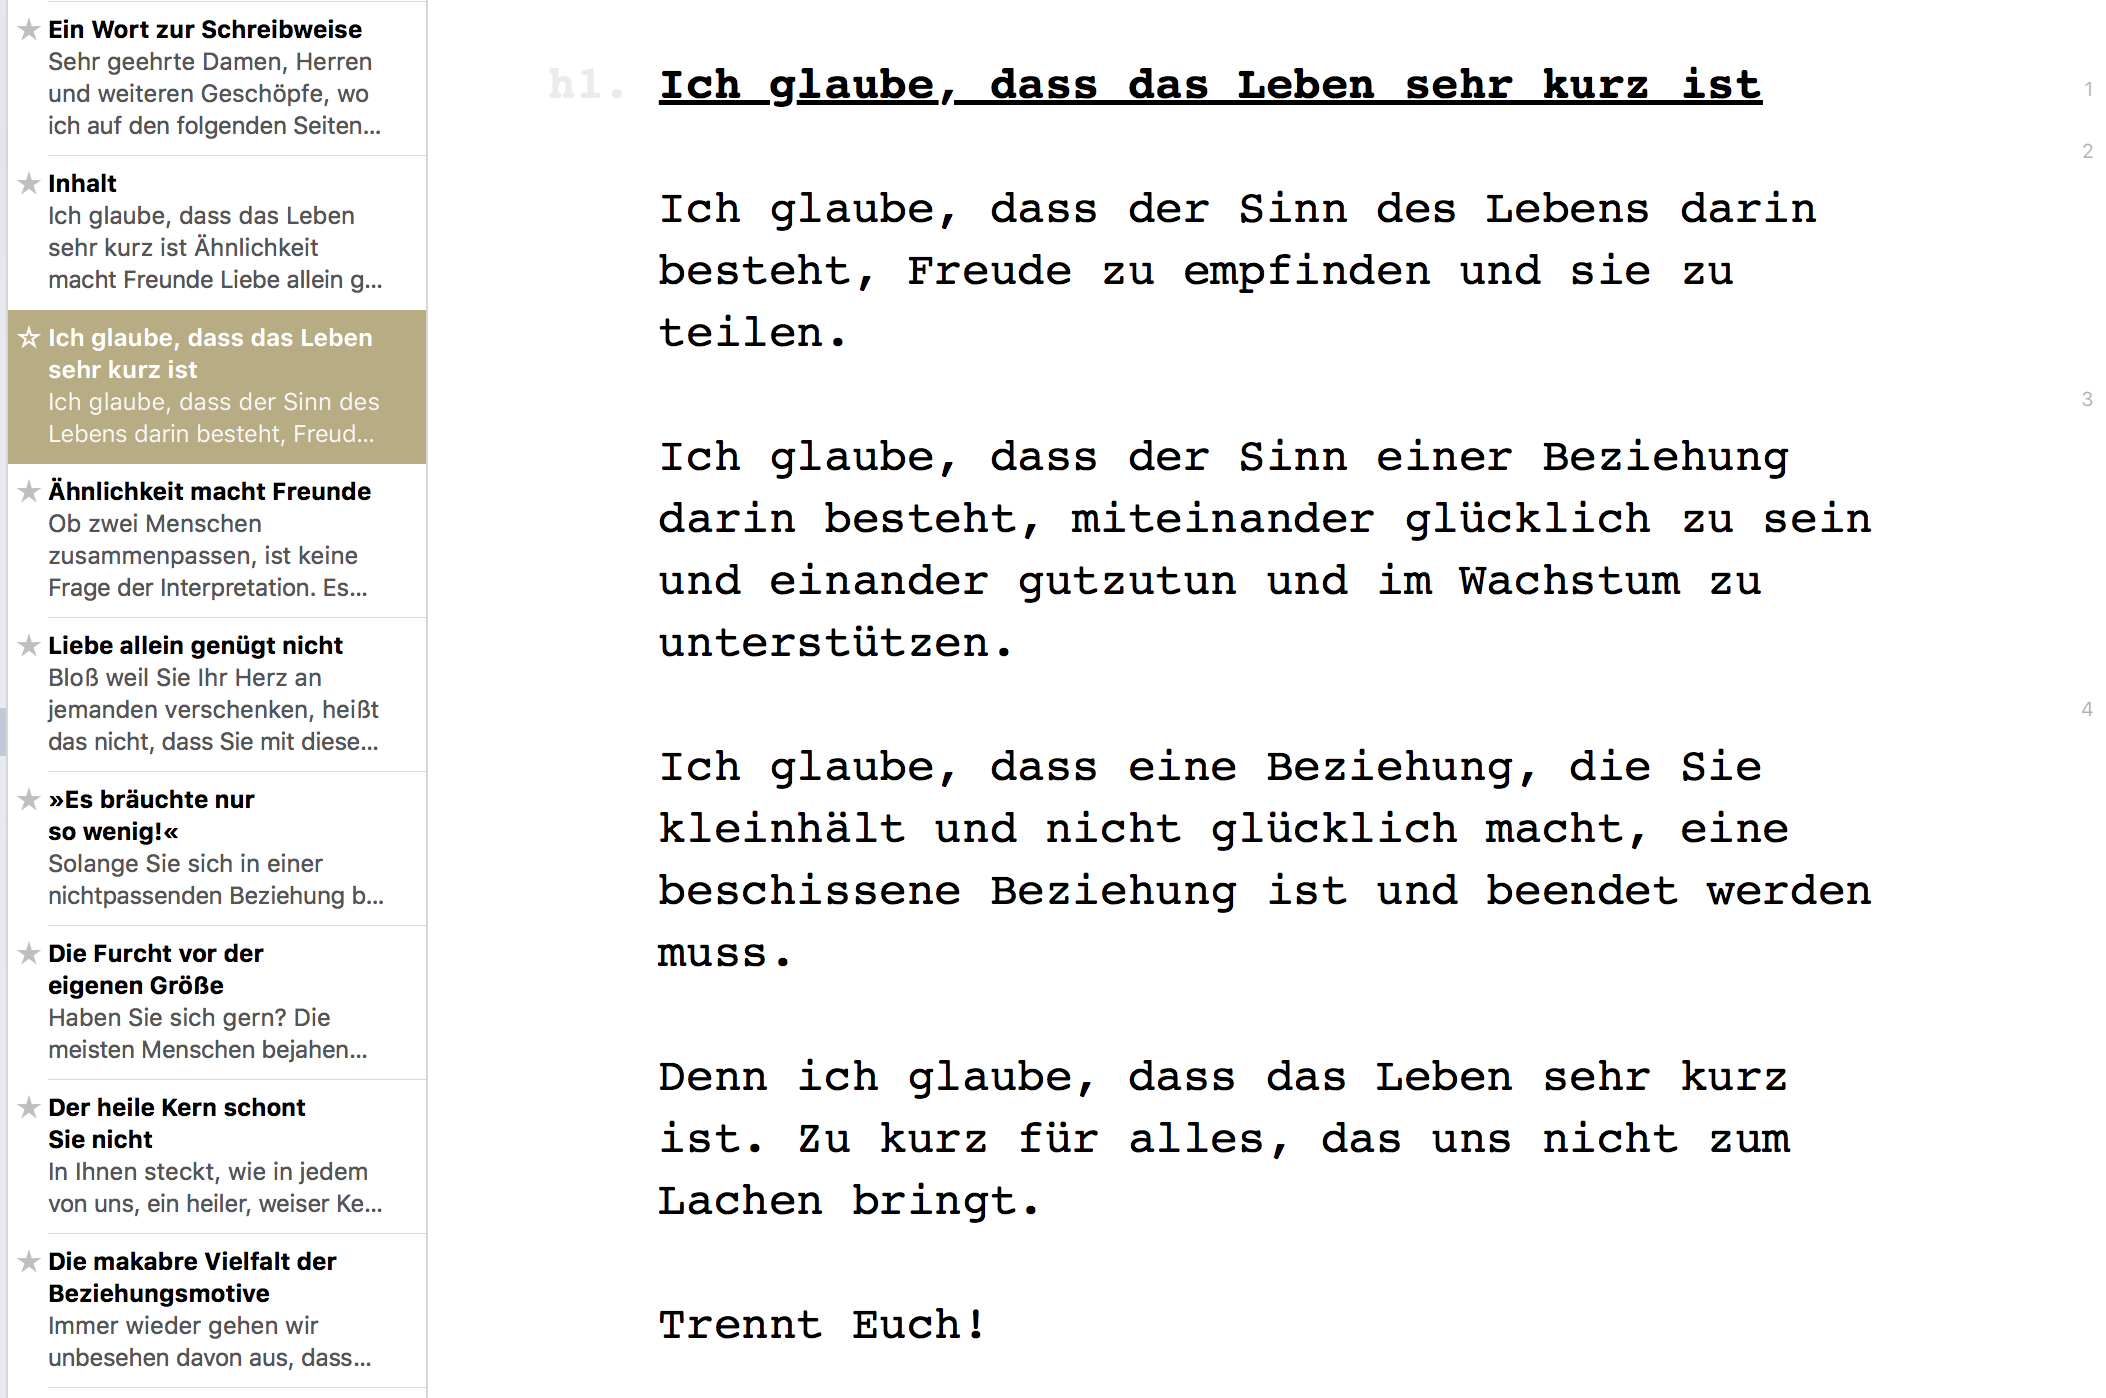 A screenshot from Meyer’s essay Trennt euch!, written with Ulysses